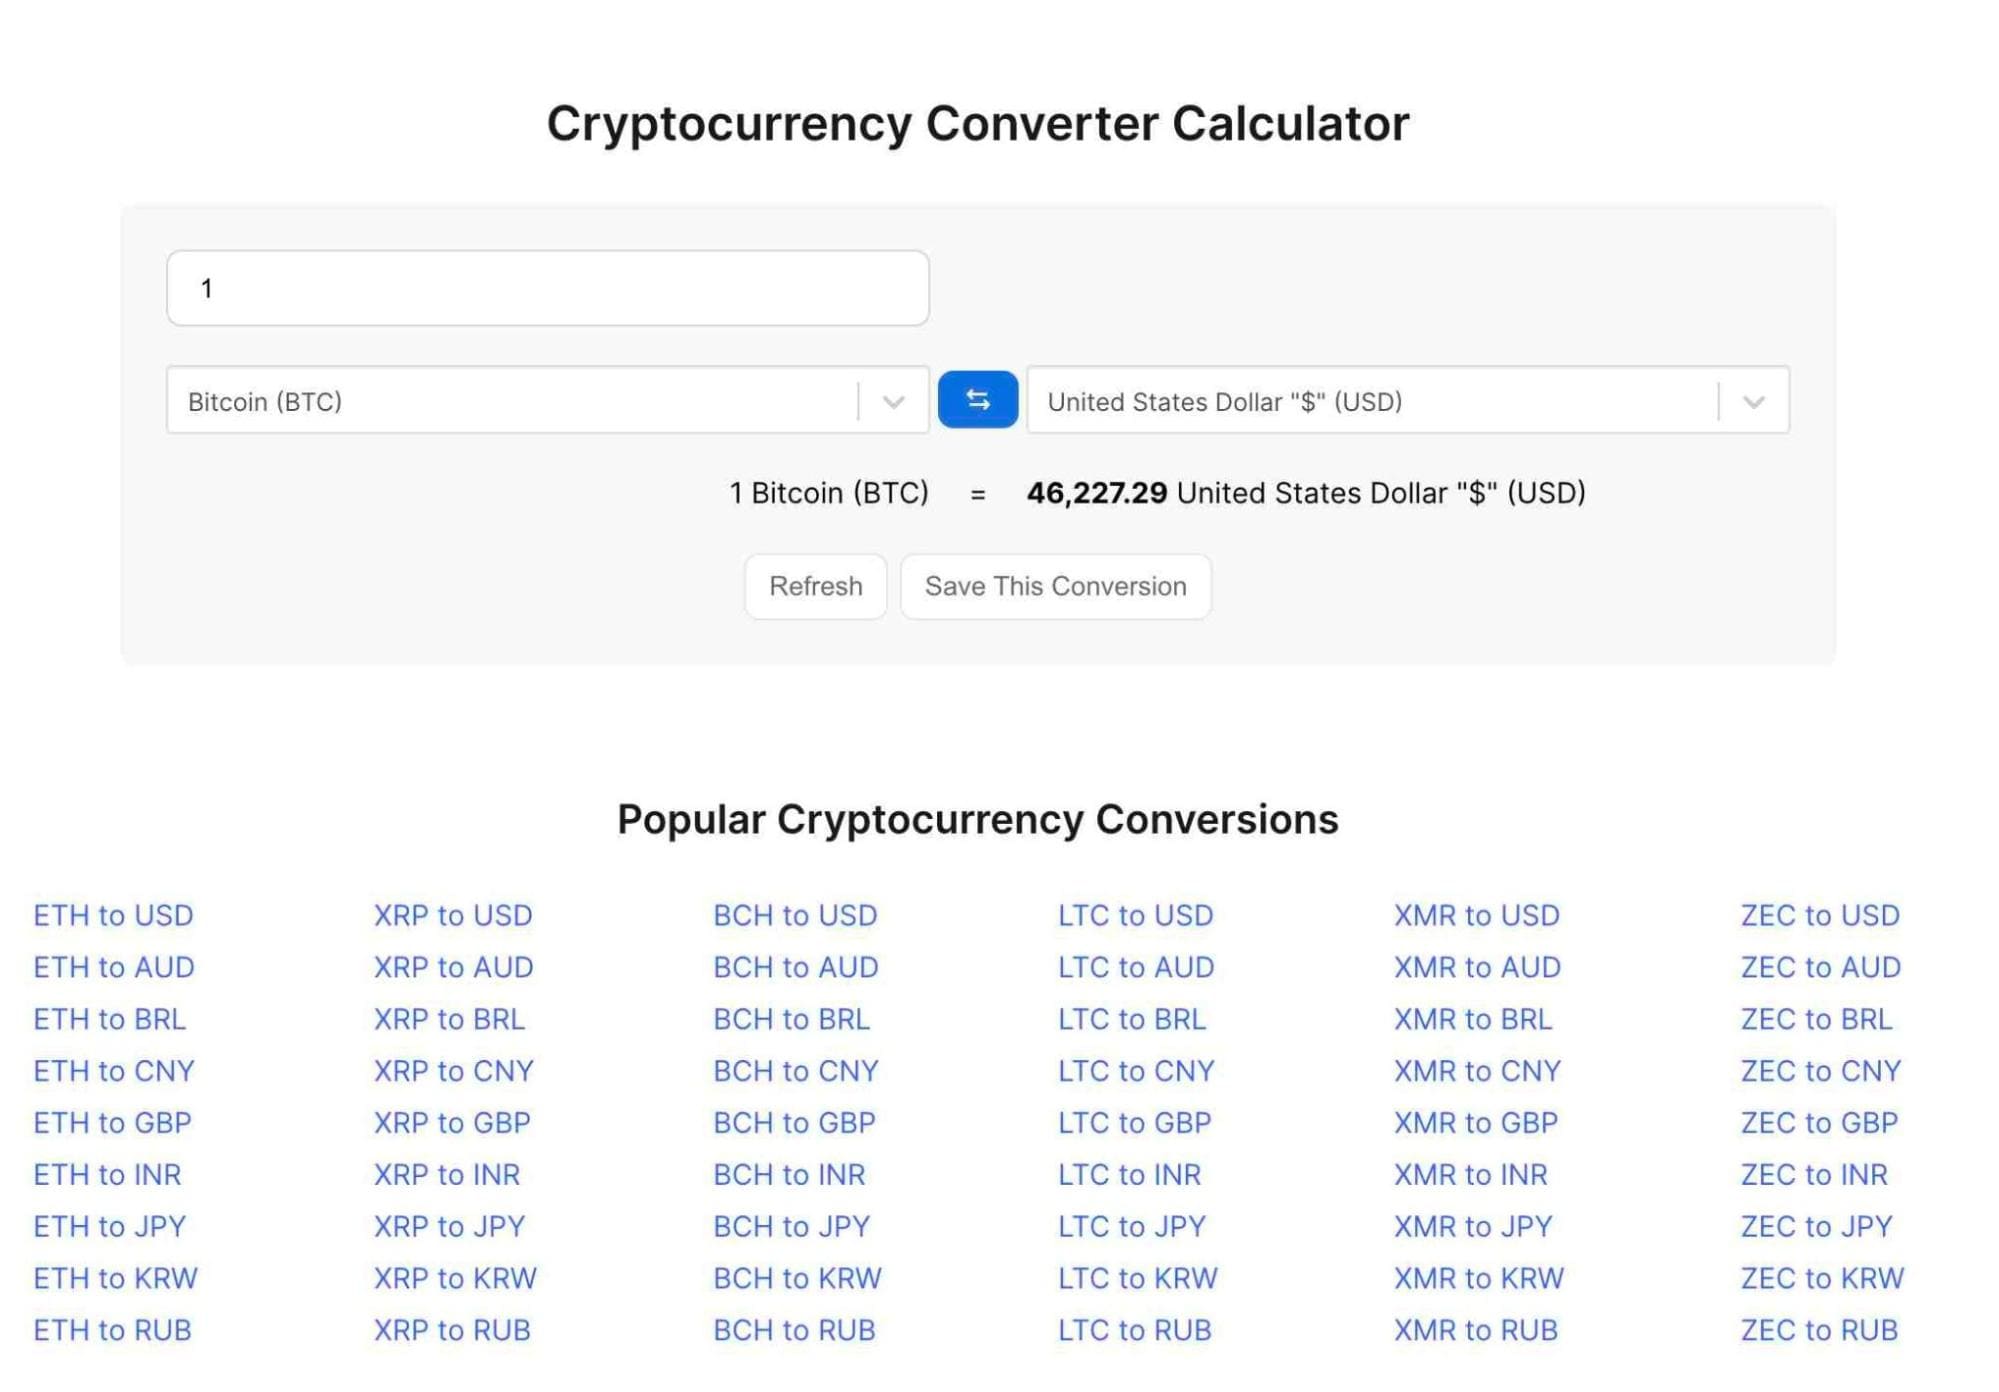 Free Crypto Profit Calculator India | Calculate Profit or Loss from Crypto Transactions with KoinX